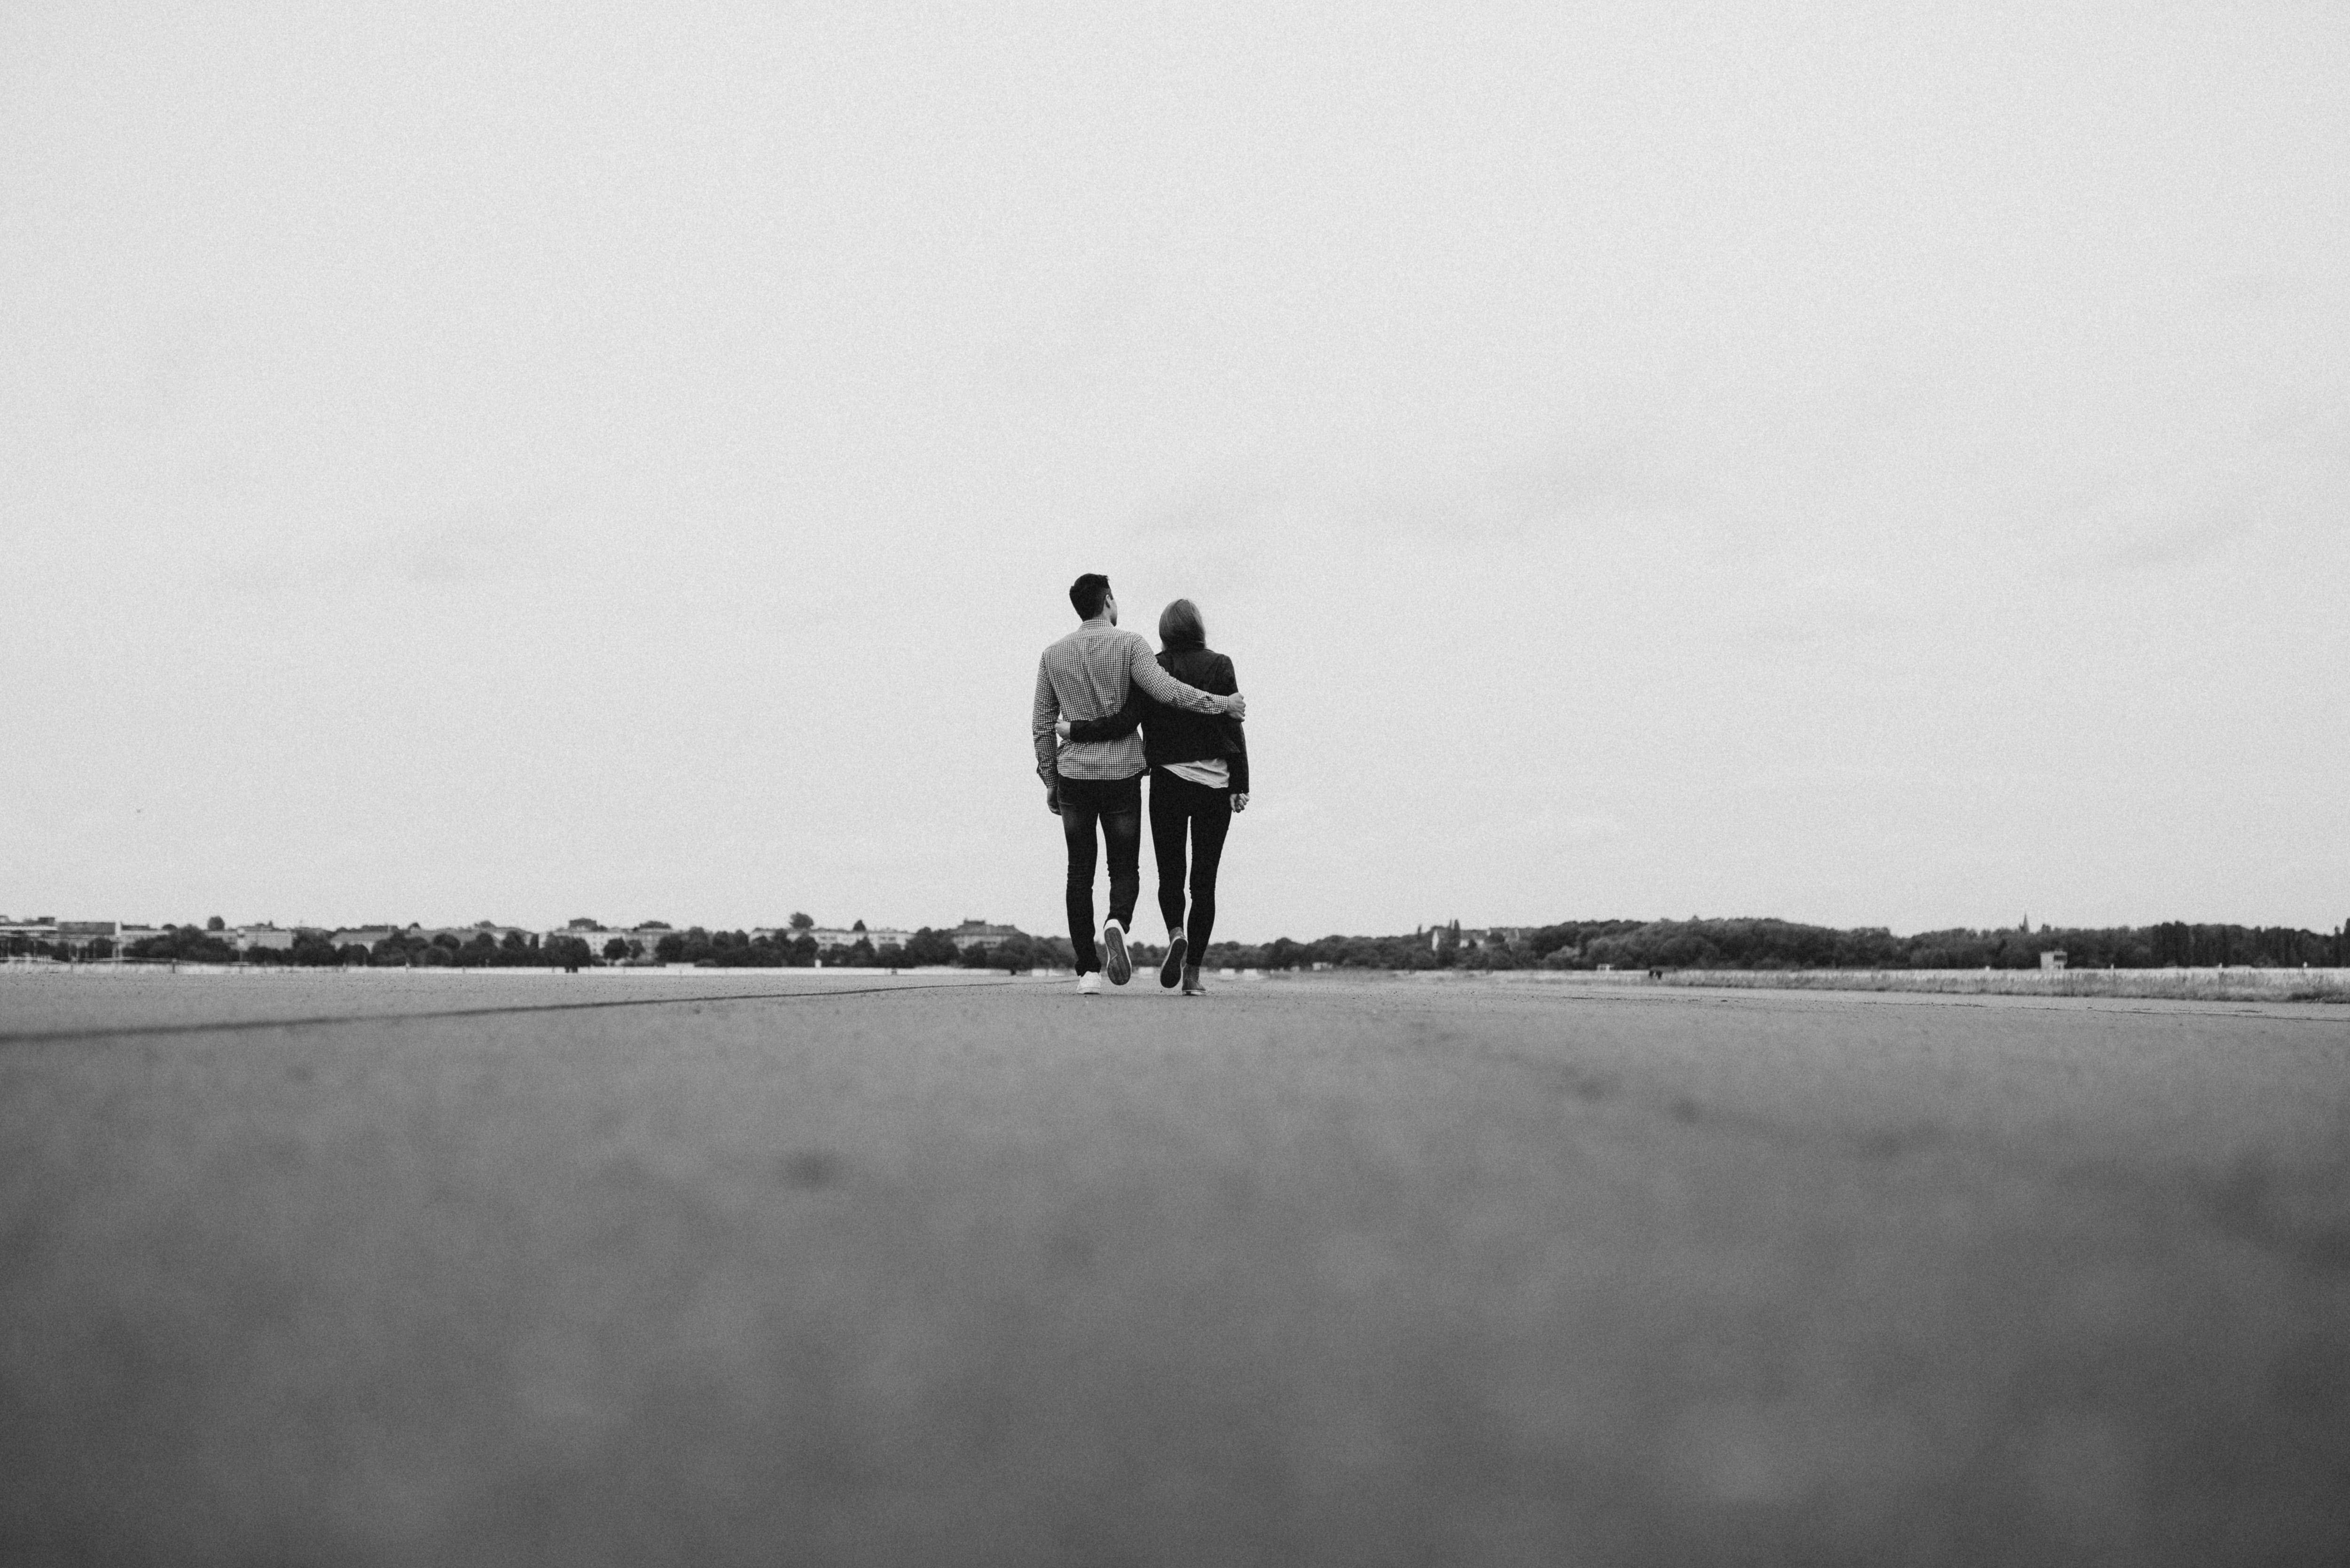 Walk the streets, man and woman walking on pathway, outdoors